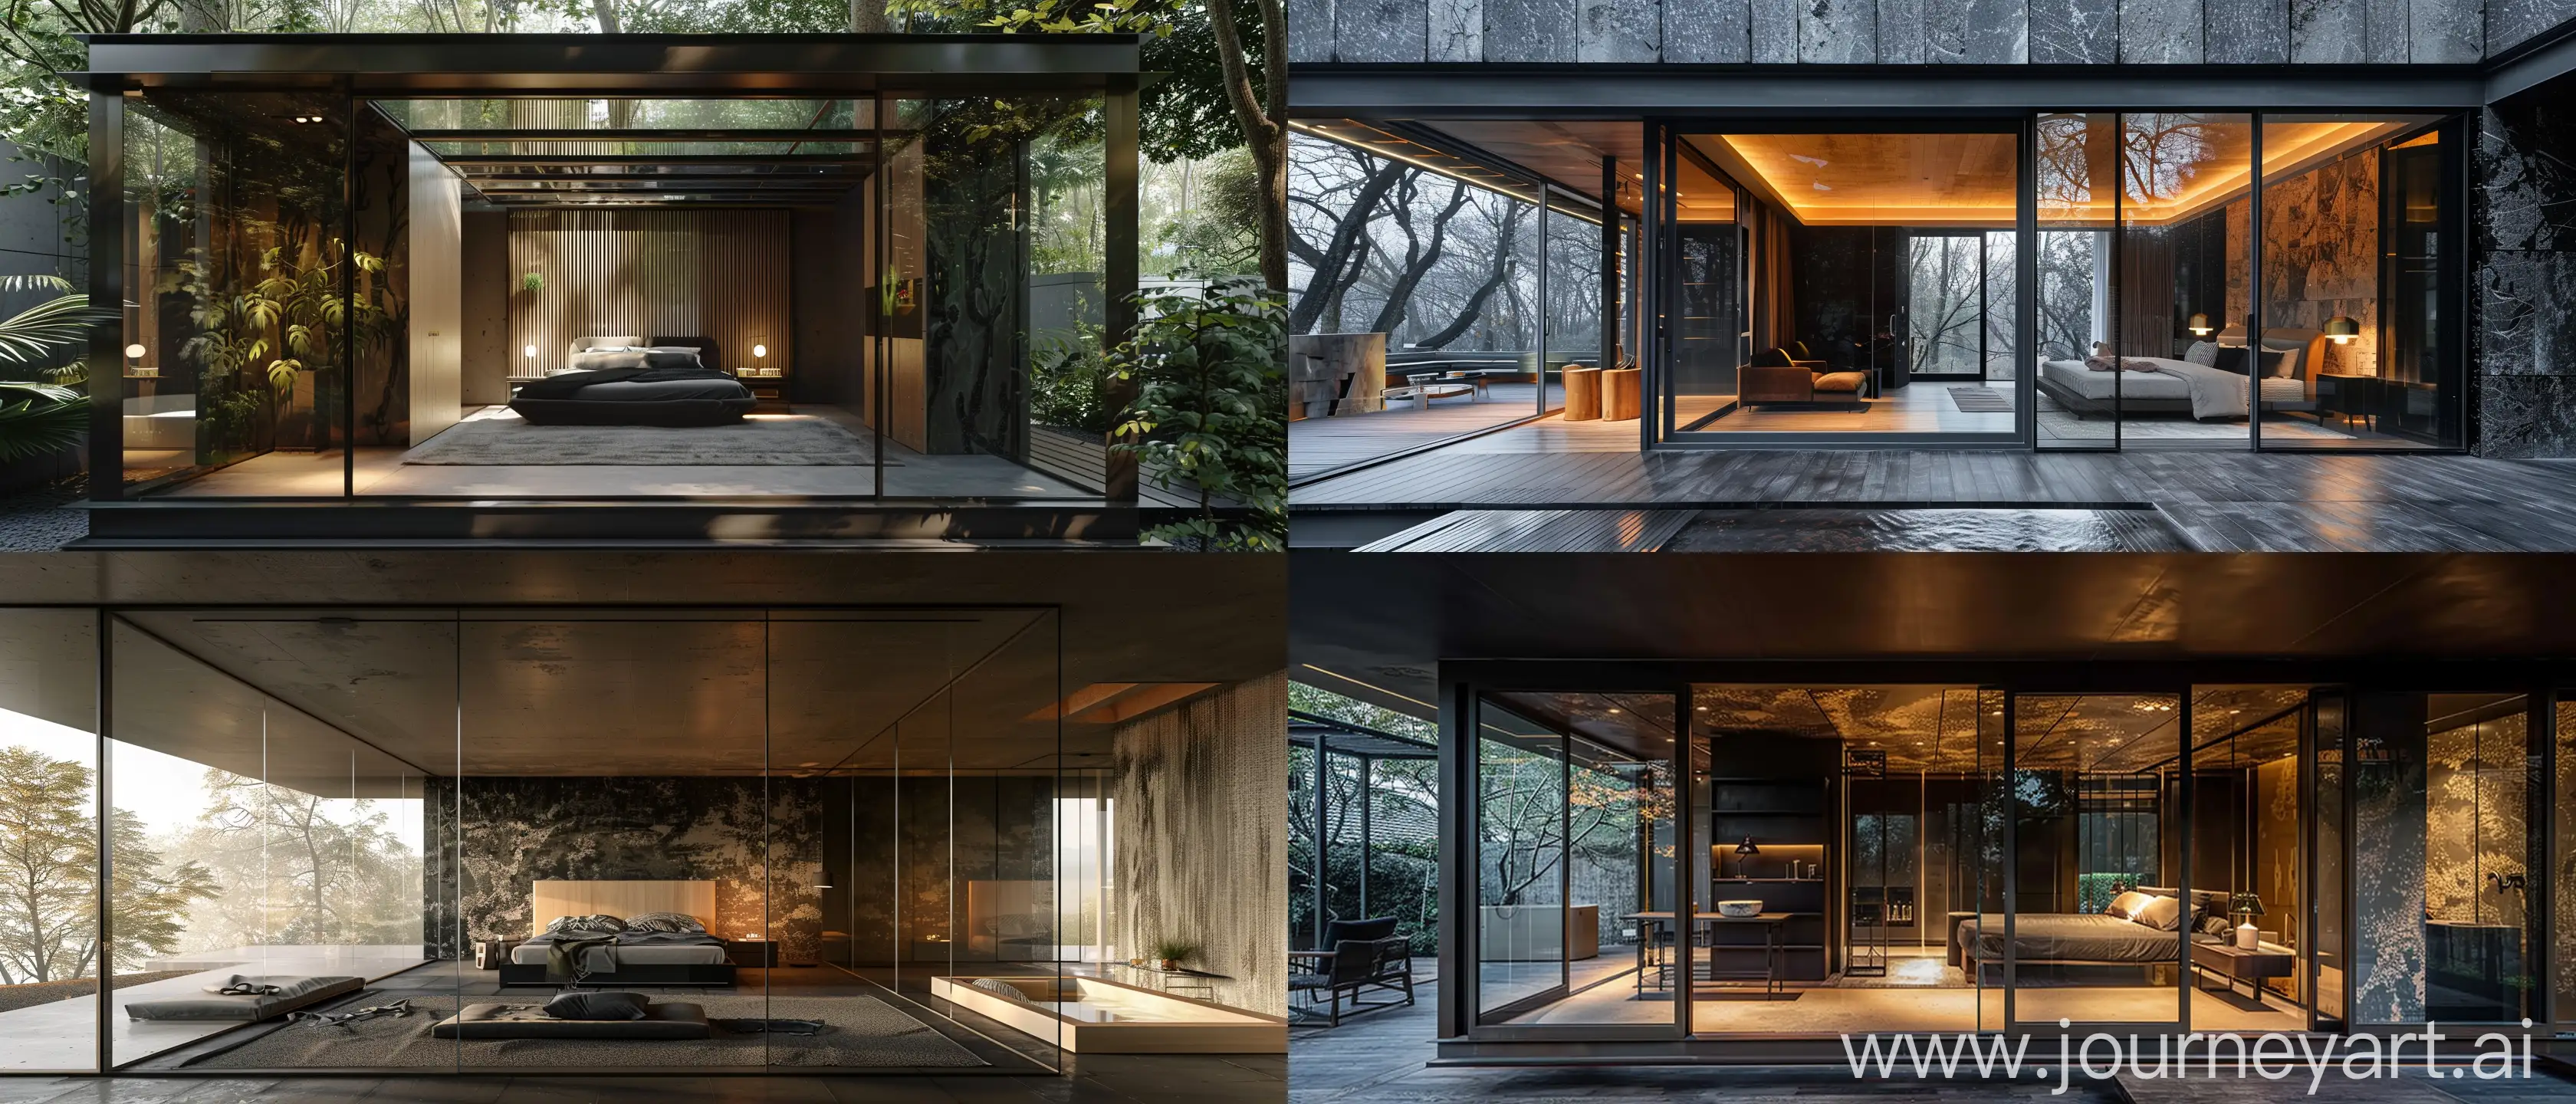 architectural photo, an open, minimalist bedroom design with glass walls, in the style of dark, moody, modular construction, nature-inspired camouflage, light black and dark black --ar 21:9 --style raw